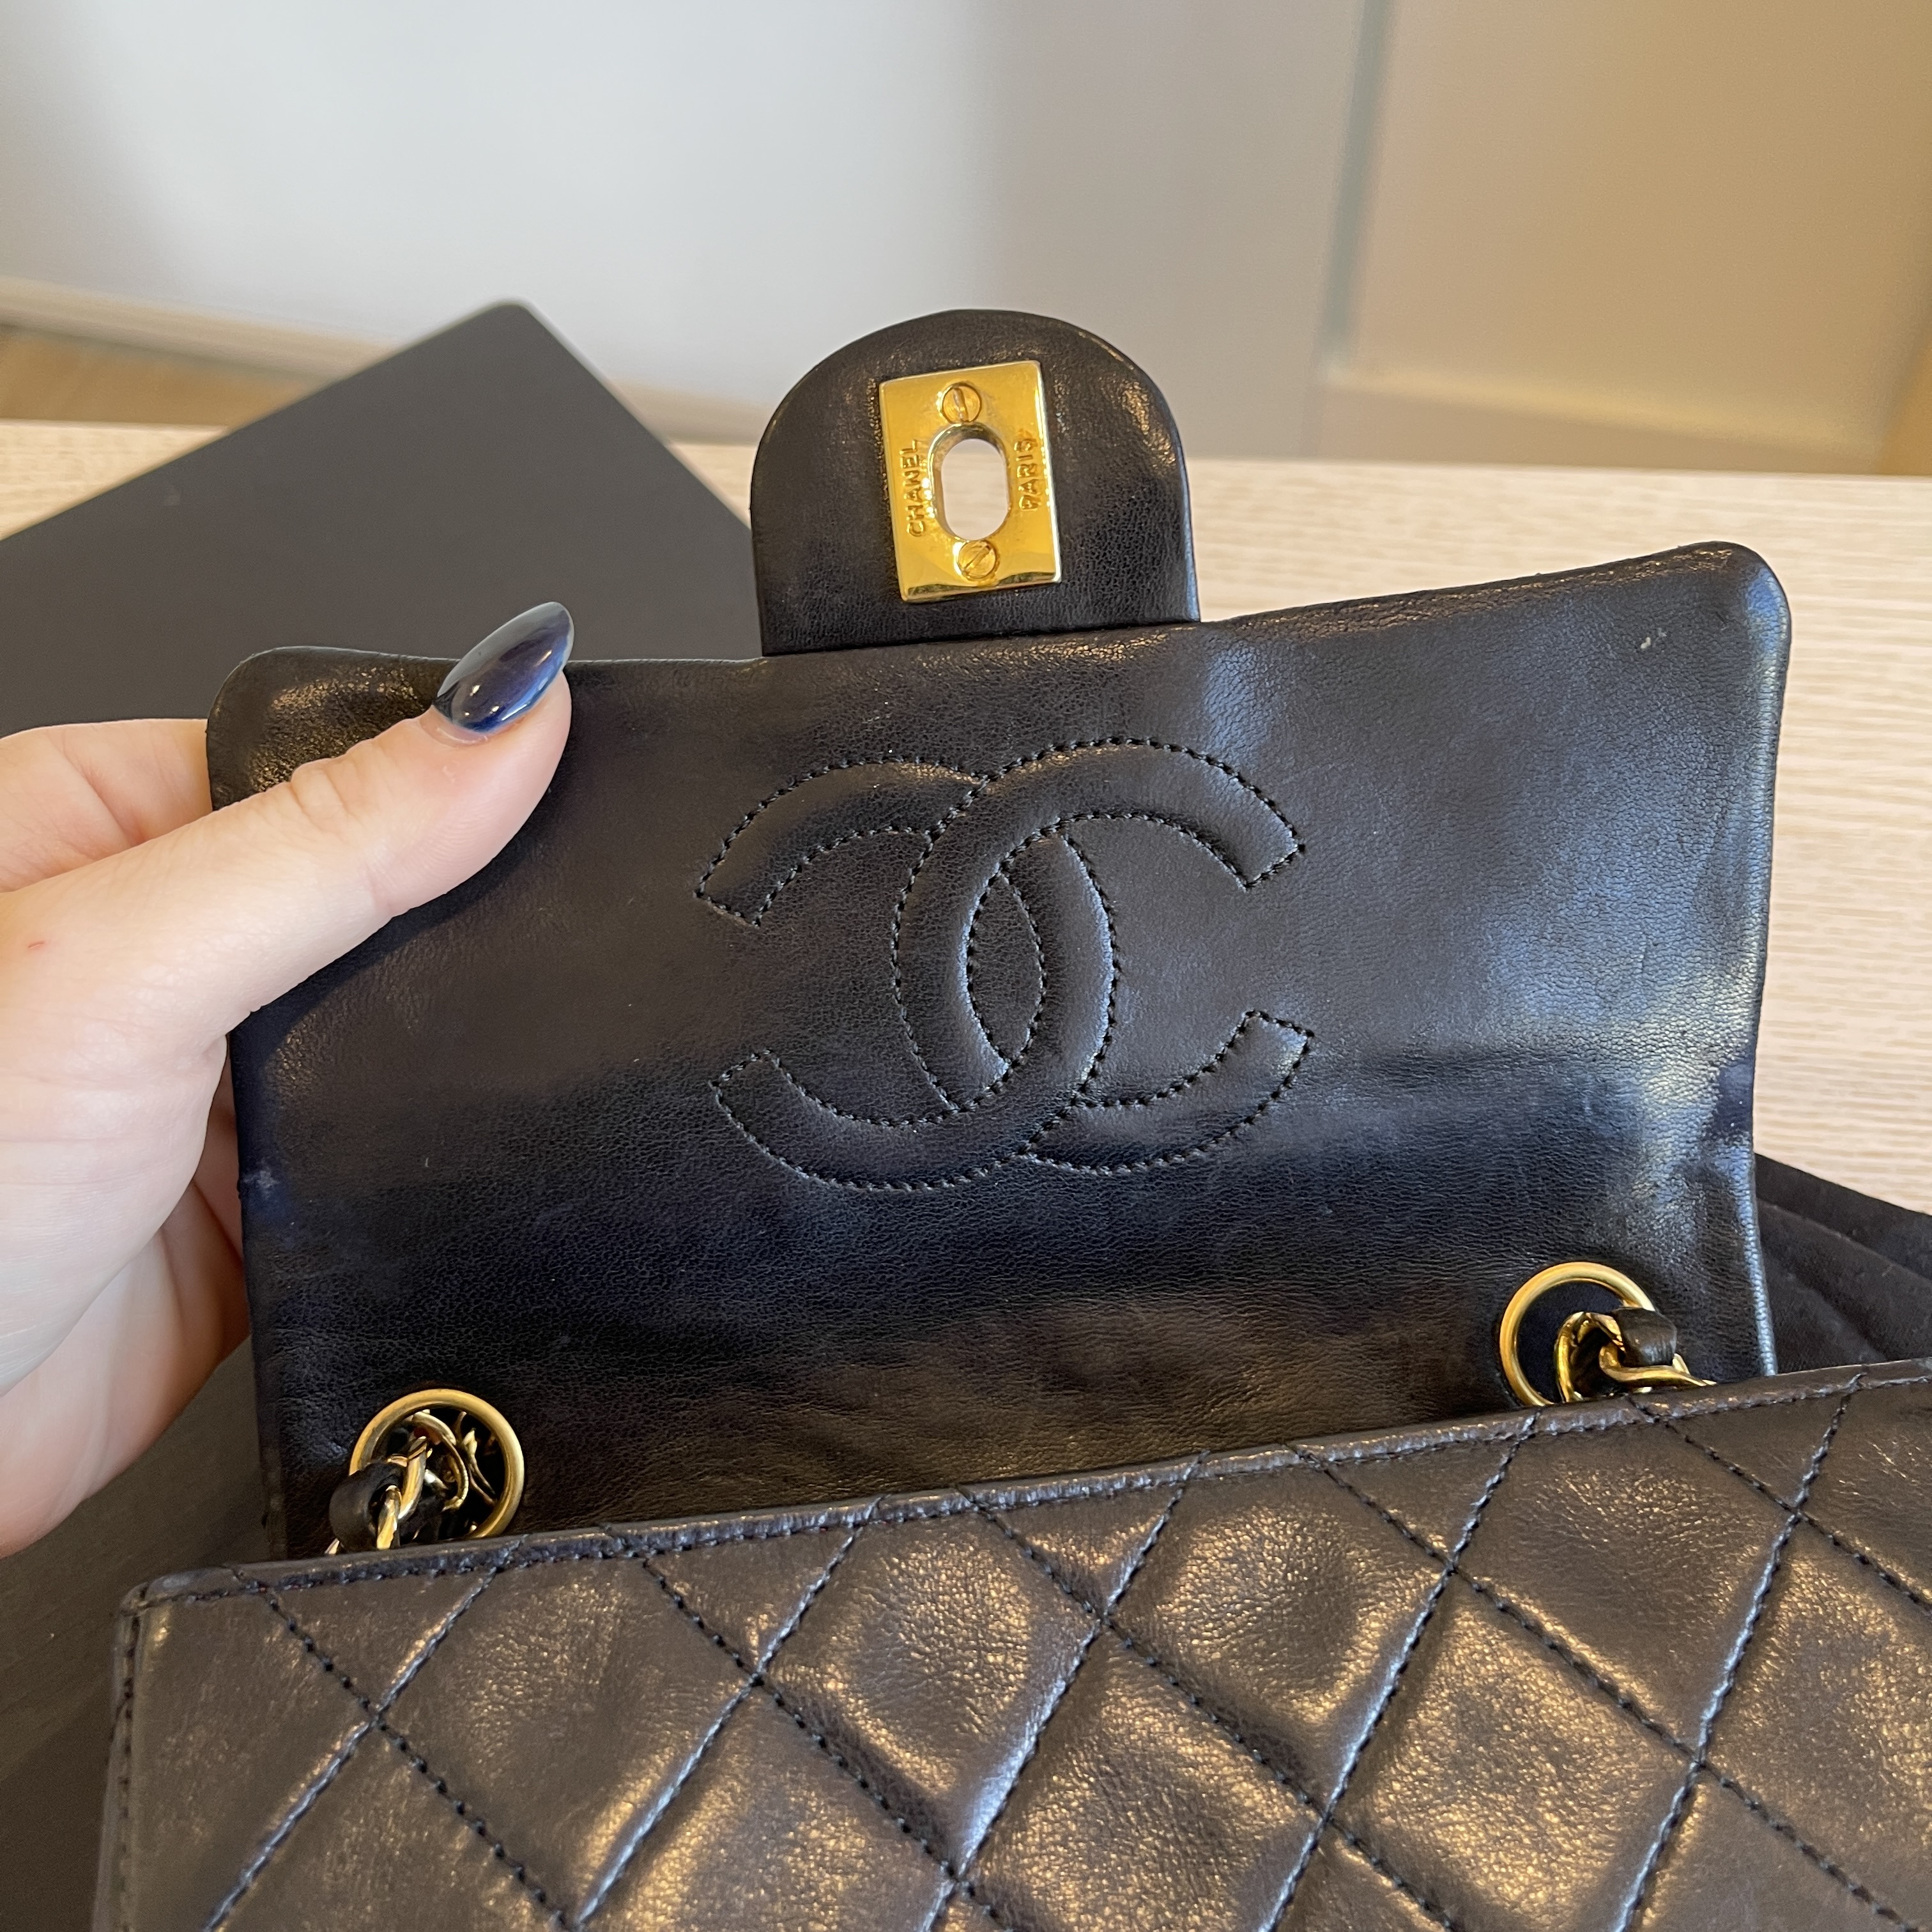 Chanel Lambskin Quilted Mini Square Flap Bag Black